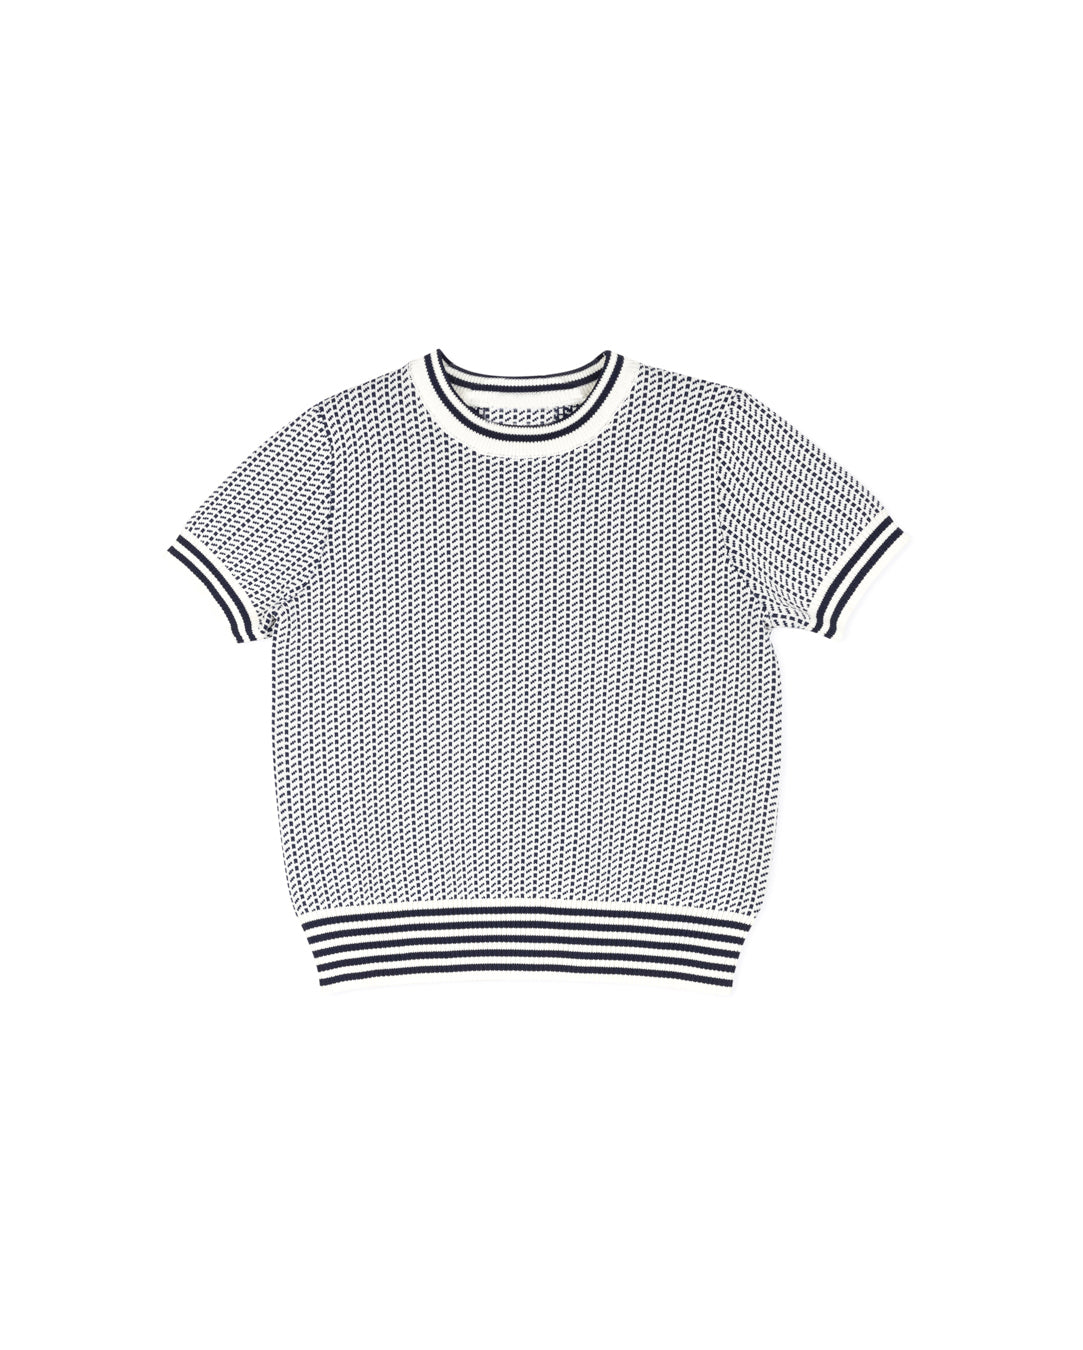 HARPER JAMES NAVY KNIT STRIPED TRIMMING SWEATER